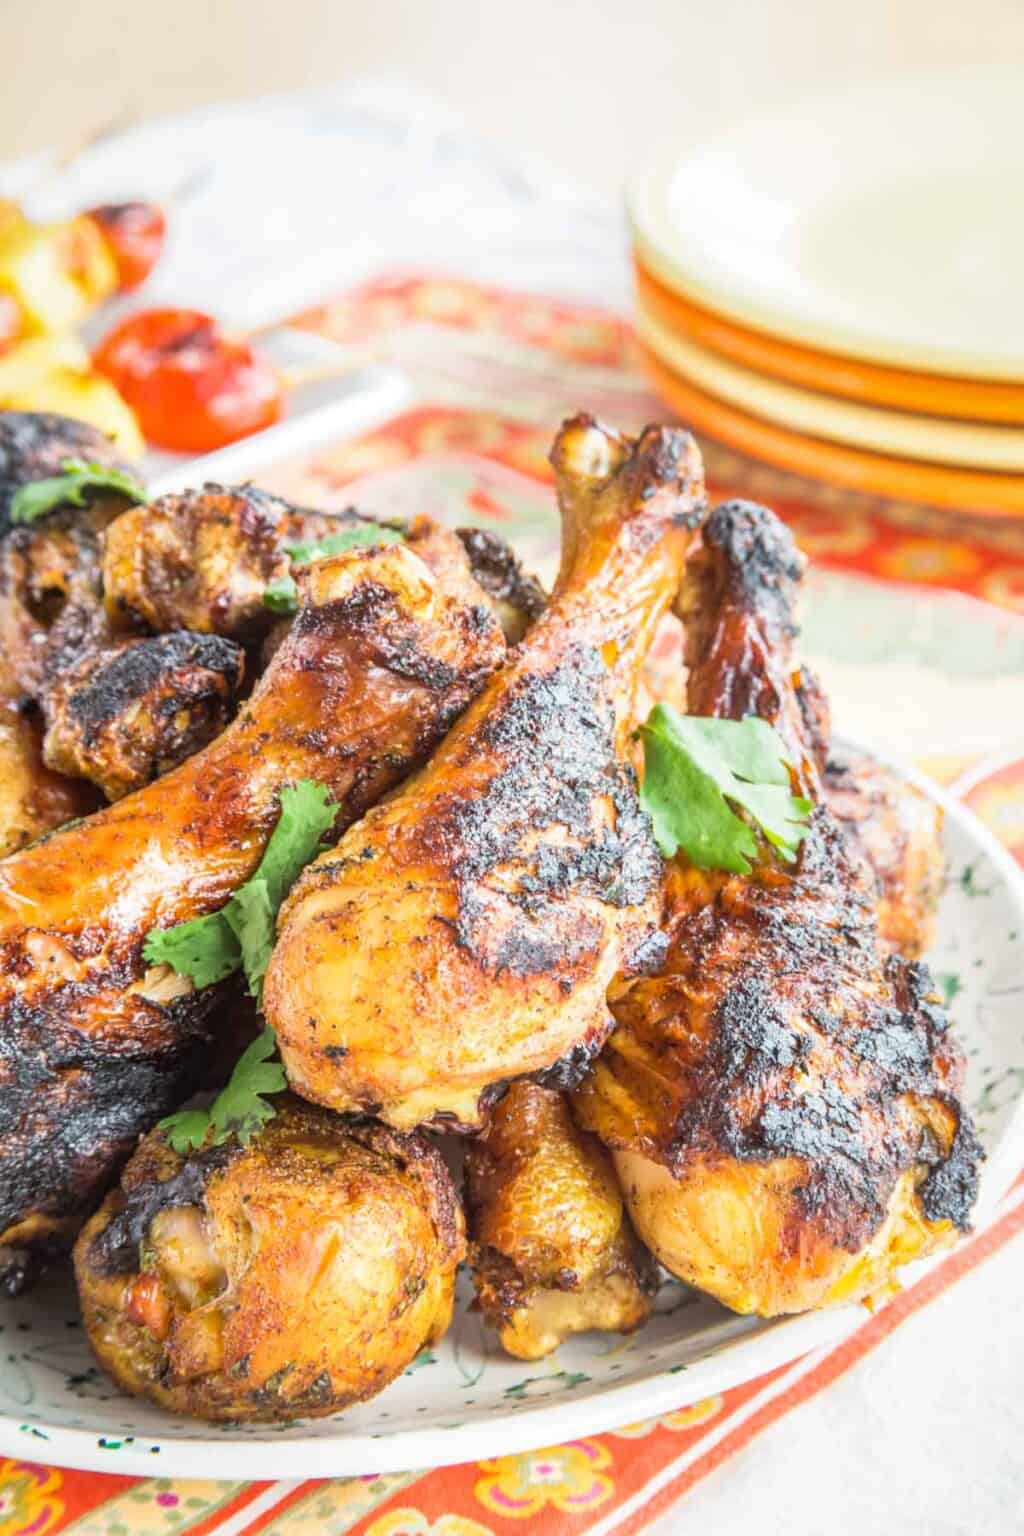 Tandoori Chicken Legs - Indian-Inspired Baked or Grilled Drumsticks!